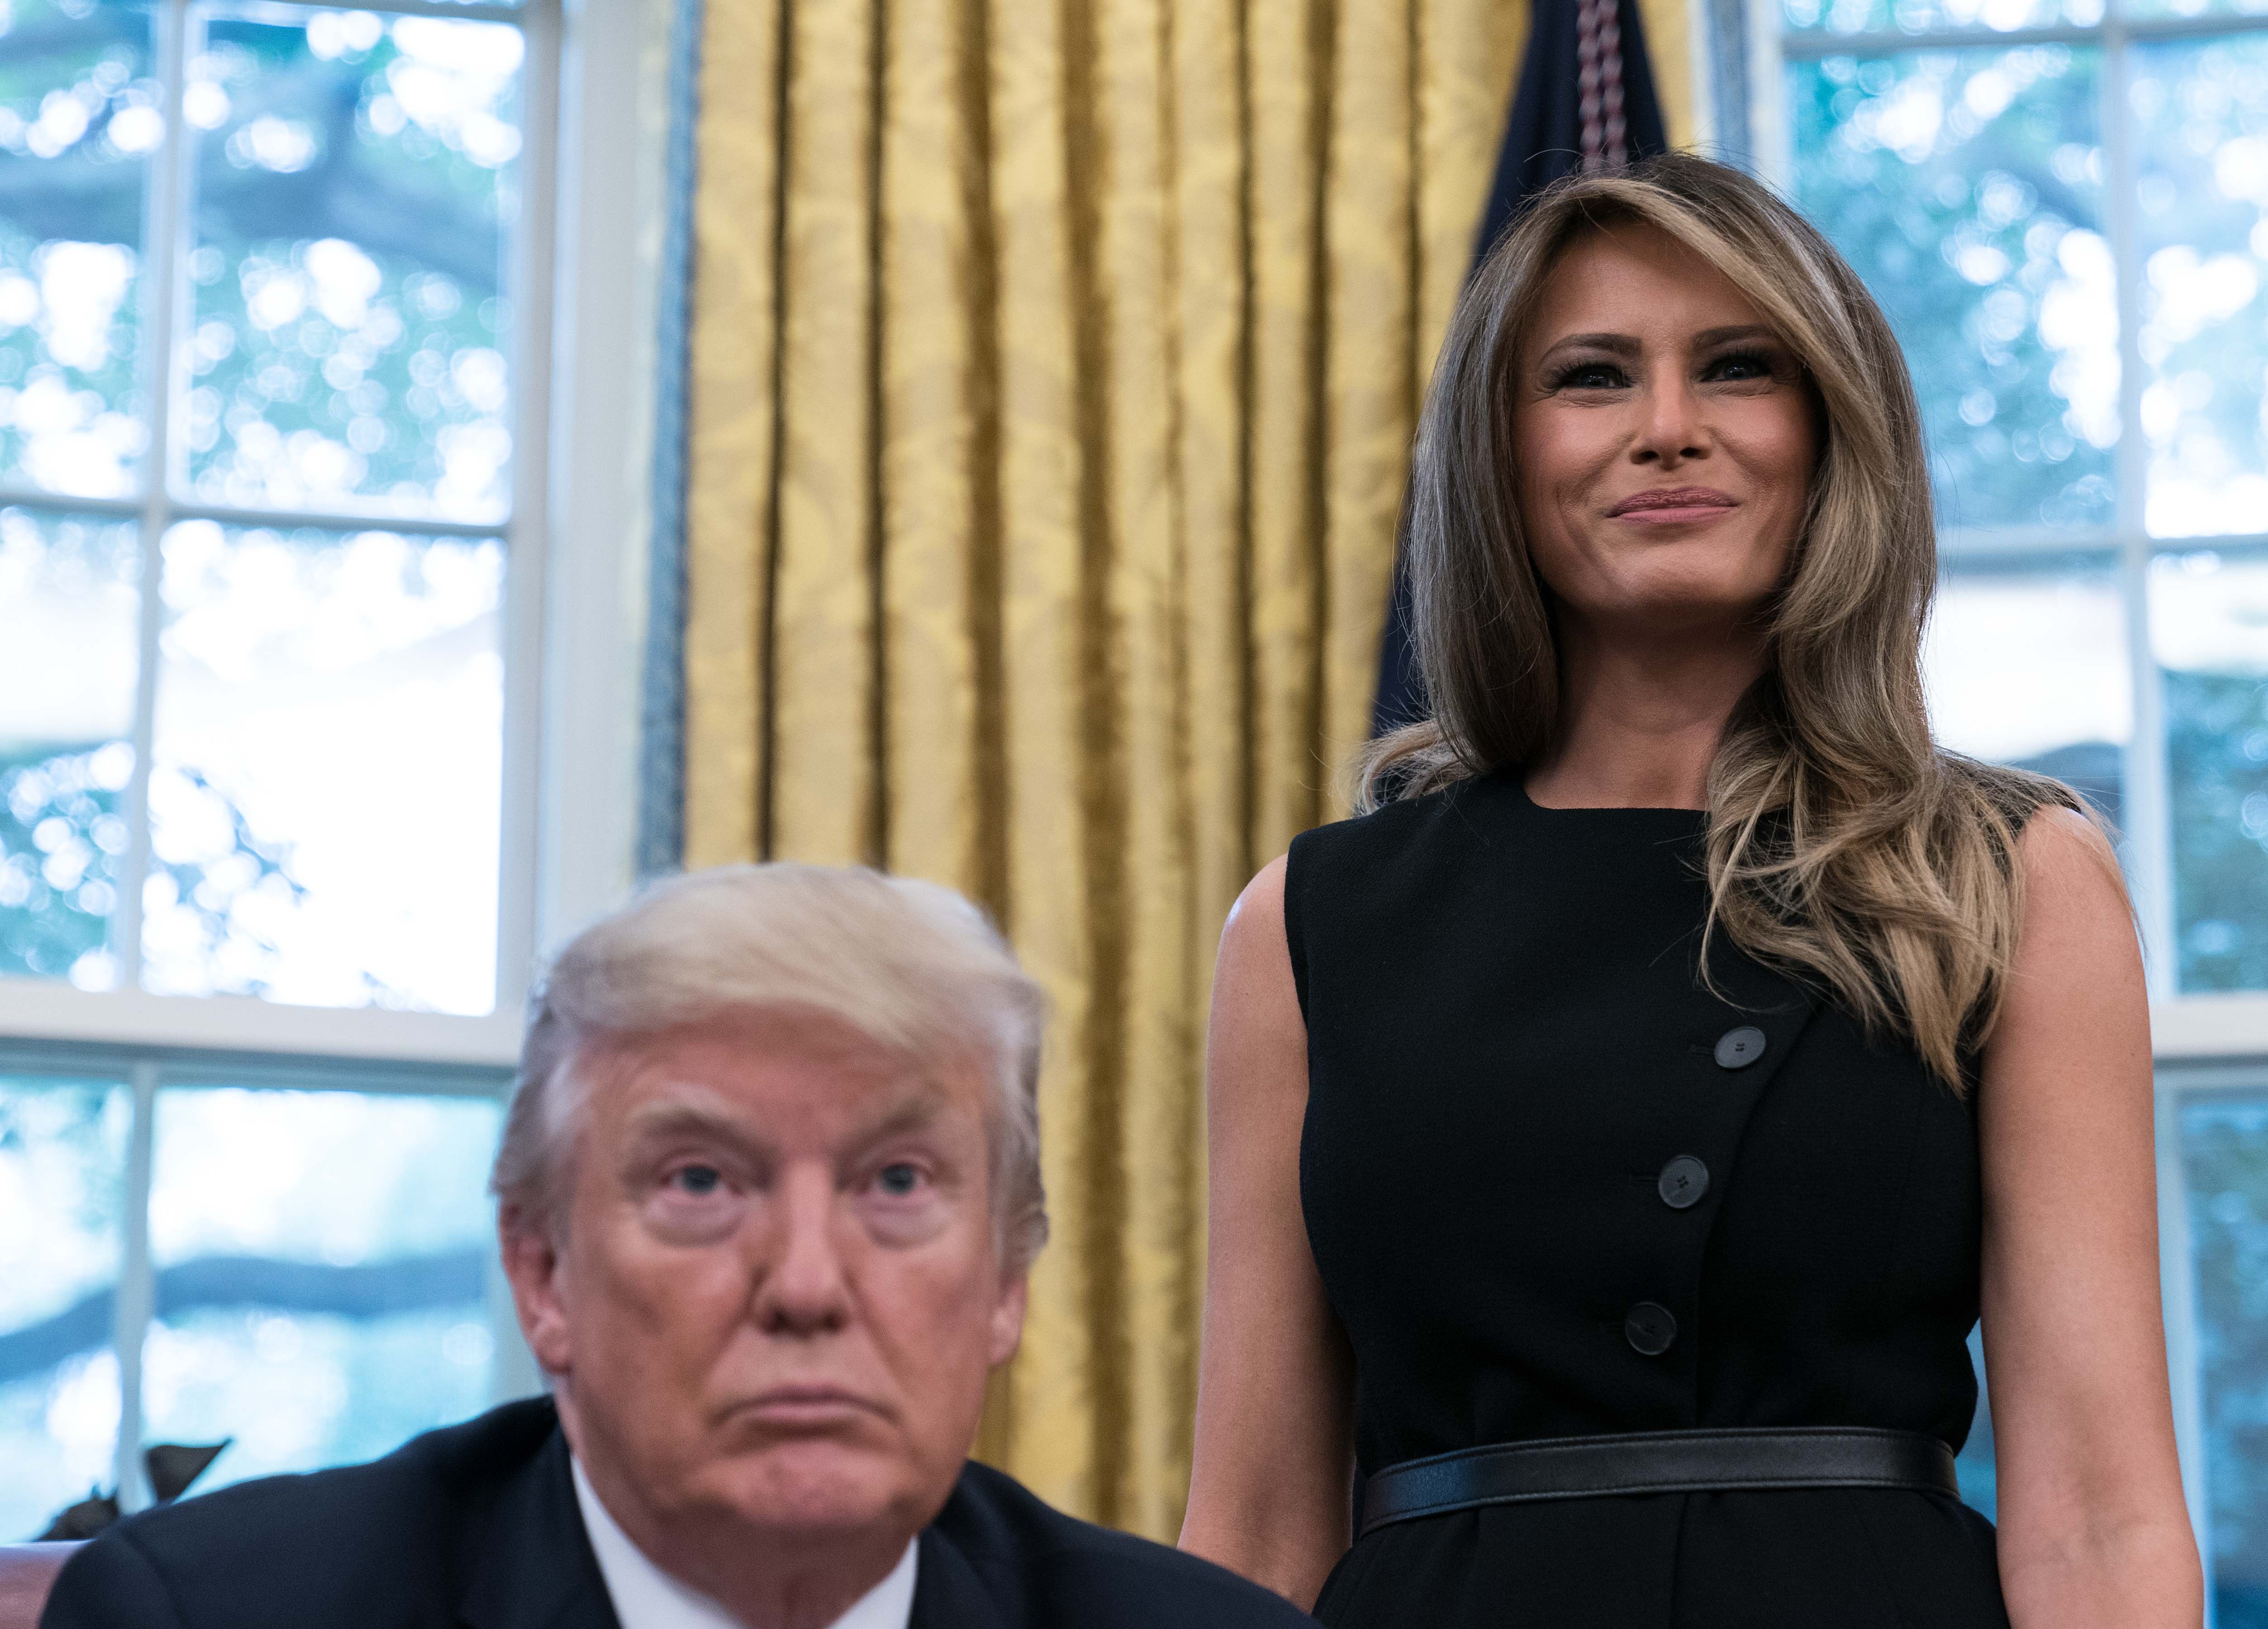 US First Lady Melania Trump smiles after speaking as President Donald Trump looks on following an update from disaster relief organizations on Hurricane Harvey recovery efforts in the Oval Office at the White House in Washington, DC, on September 1, 2017. / AFP PHOTO / NICHOLAS KAMM (Photo credit should read NICHOLAS KAMM/AFP/Getty Images)